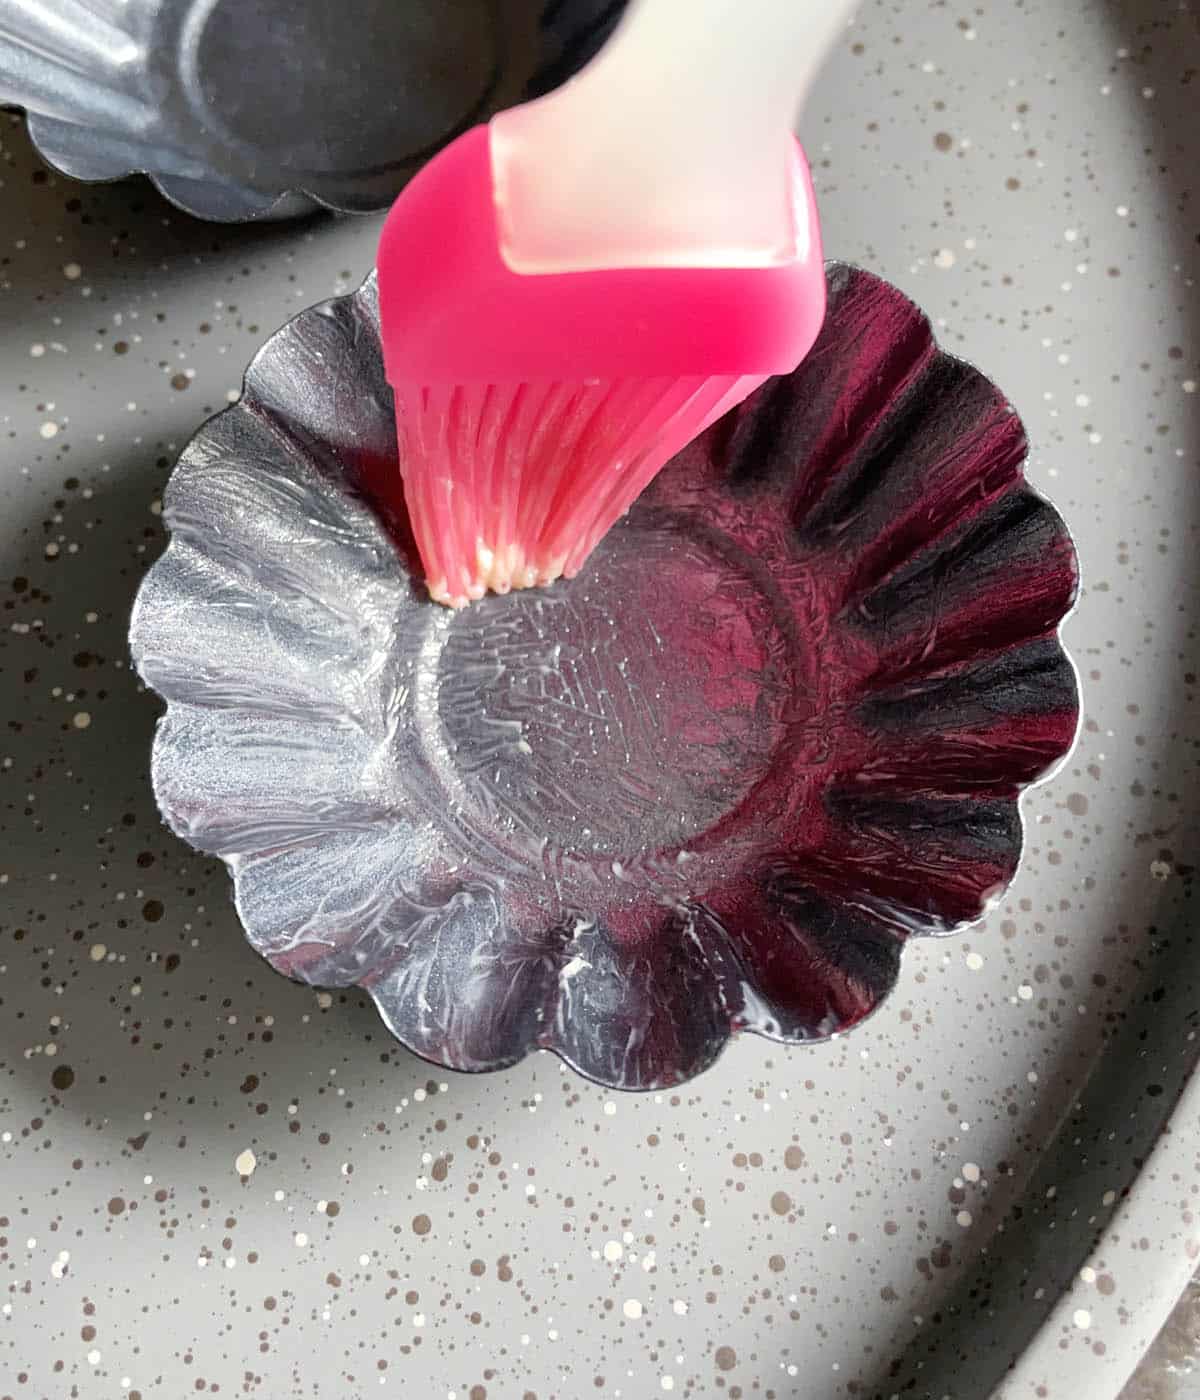 A pink brush spreading butter on a fluted grey dish.